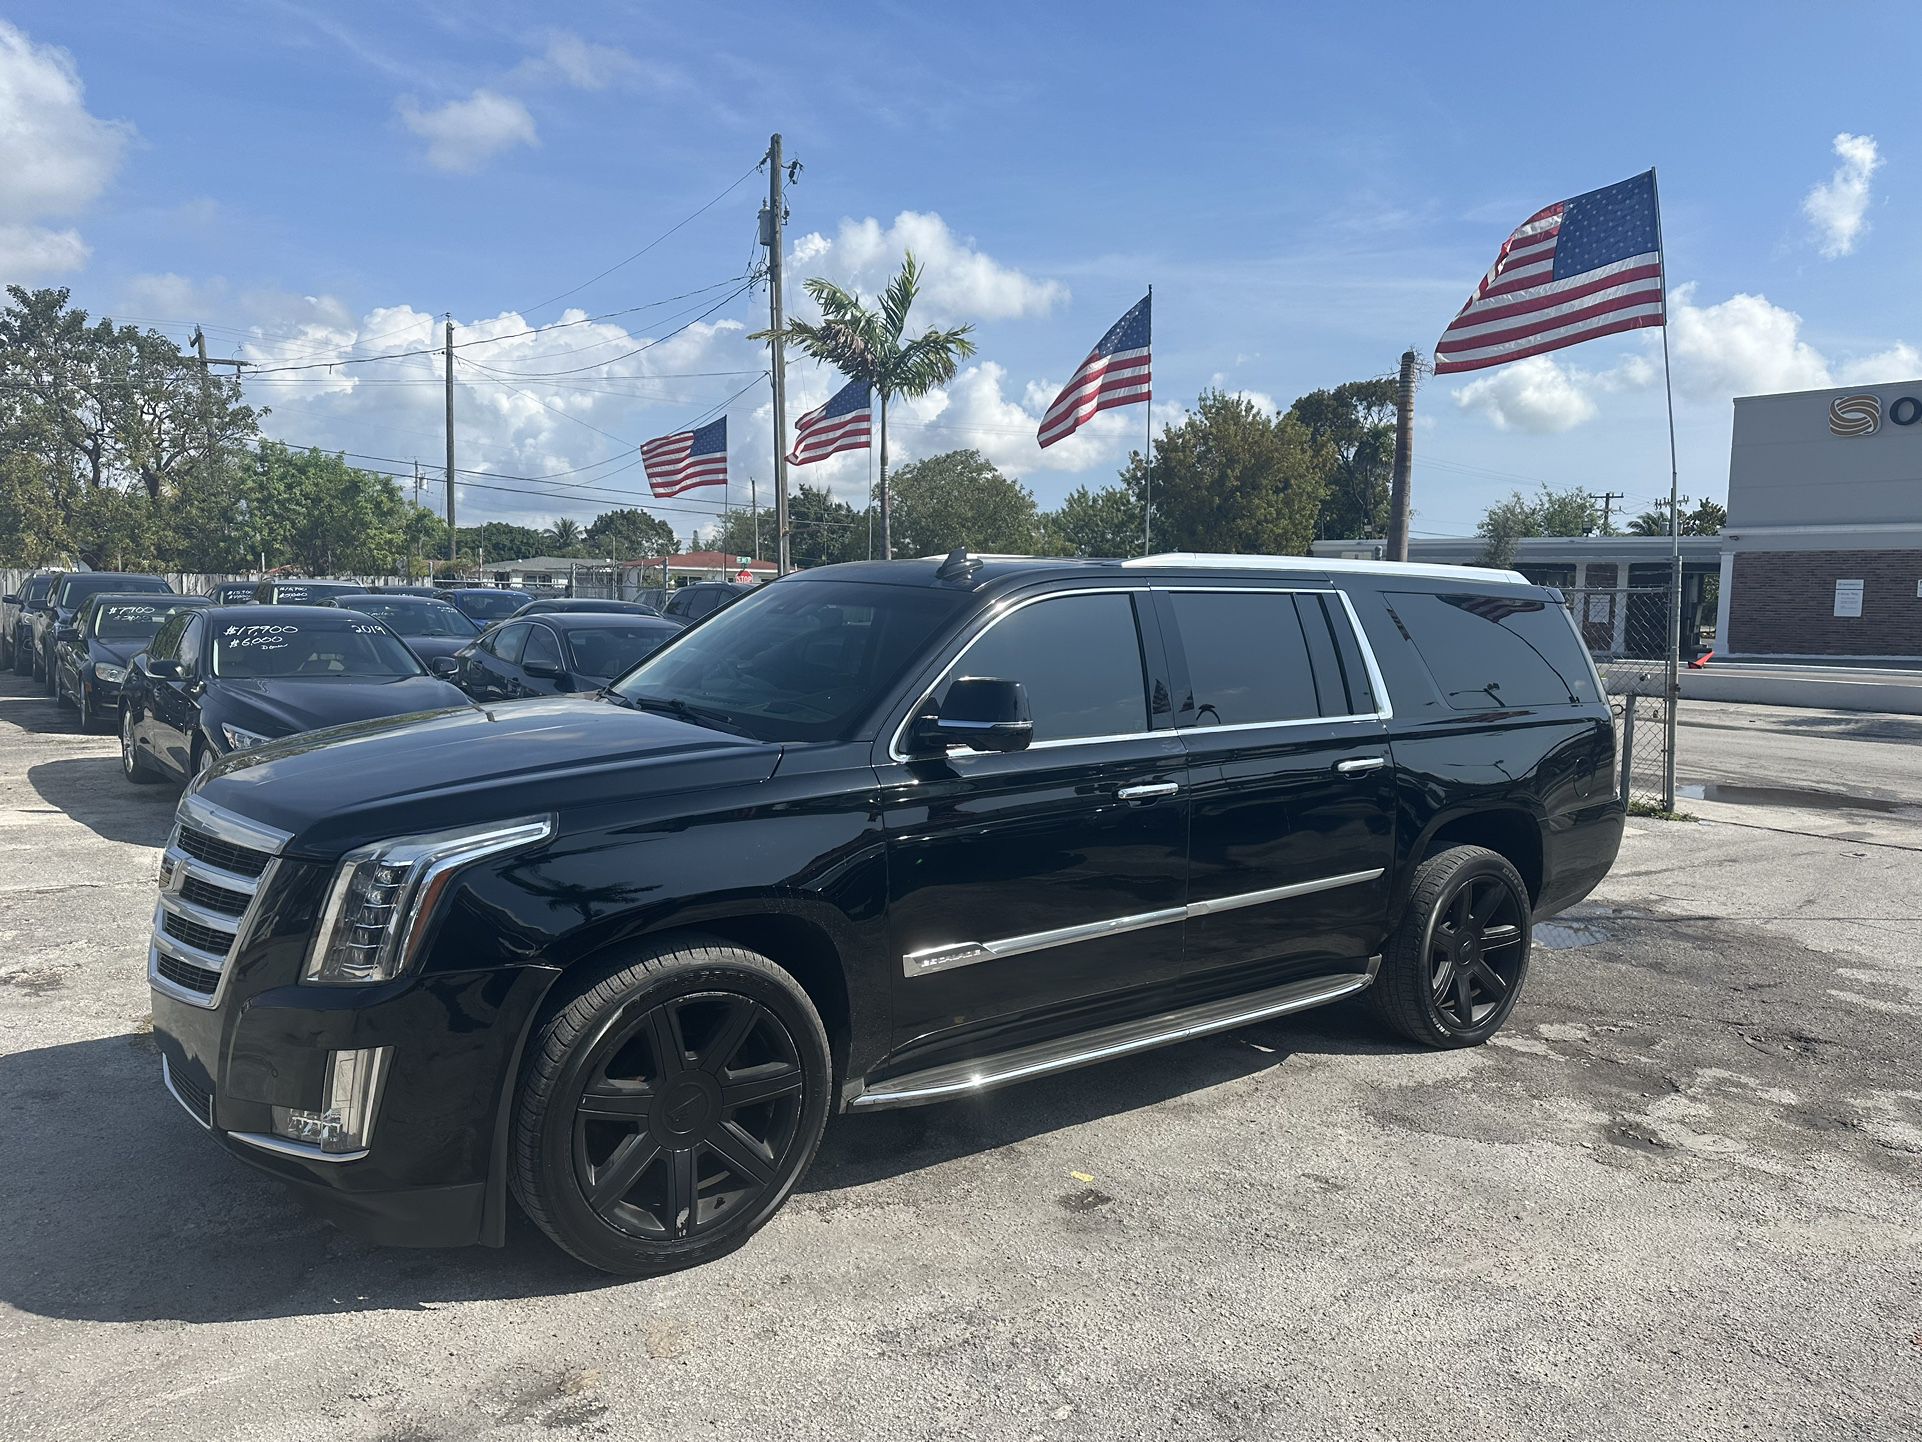 used 2016 Cadillac Escalade XL - front view 3